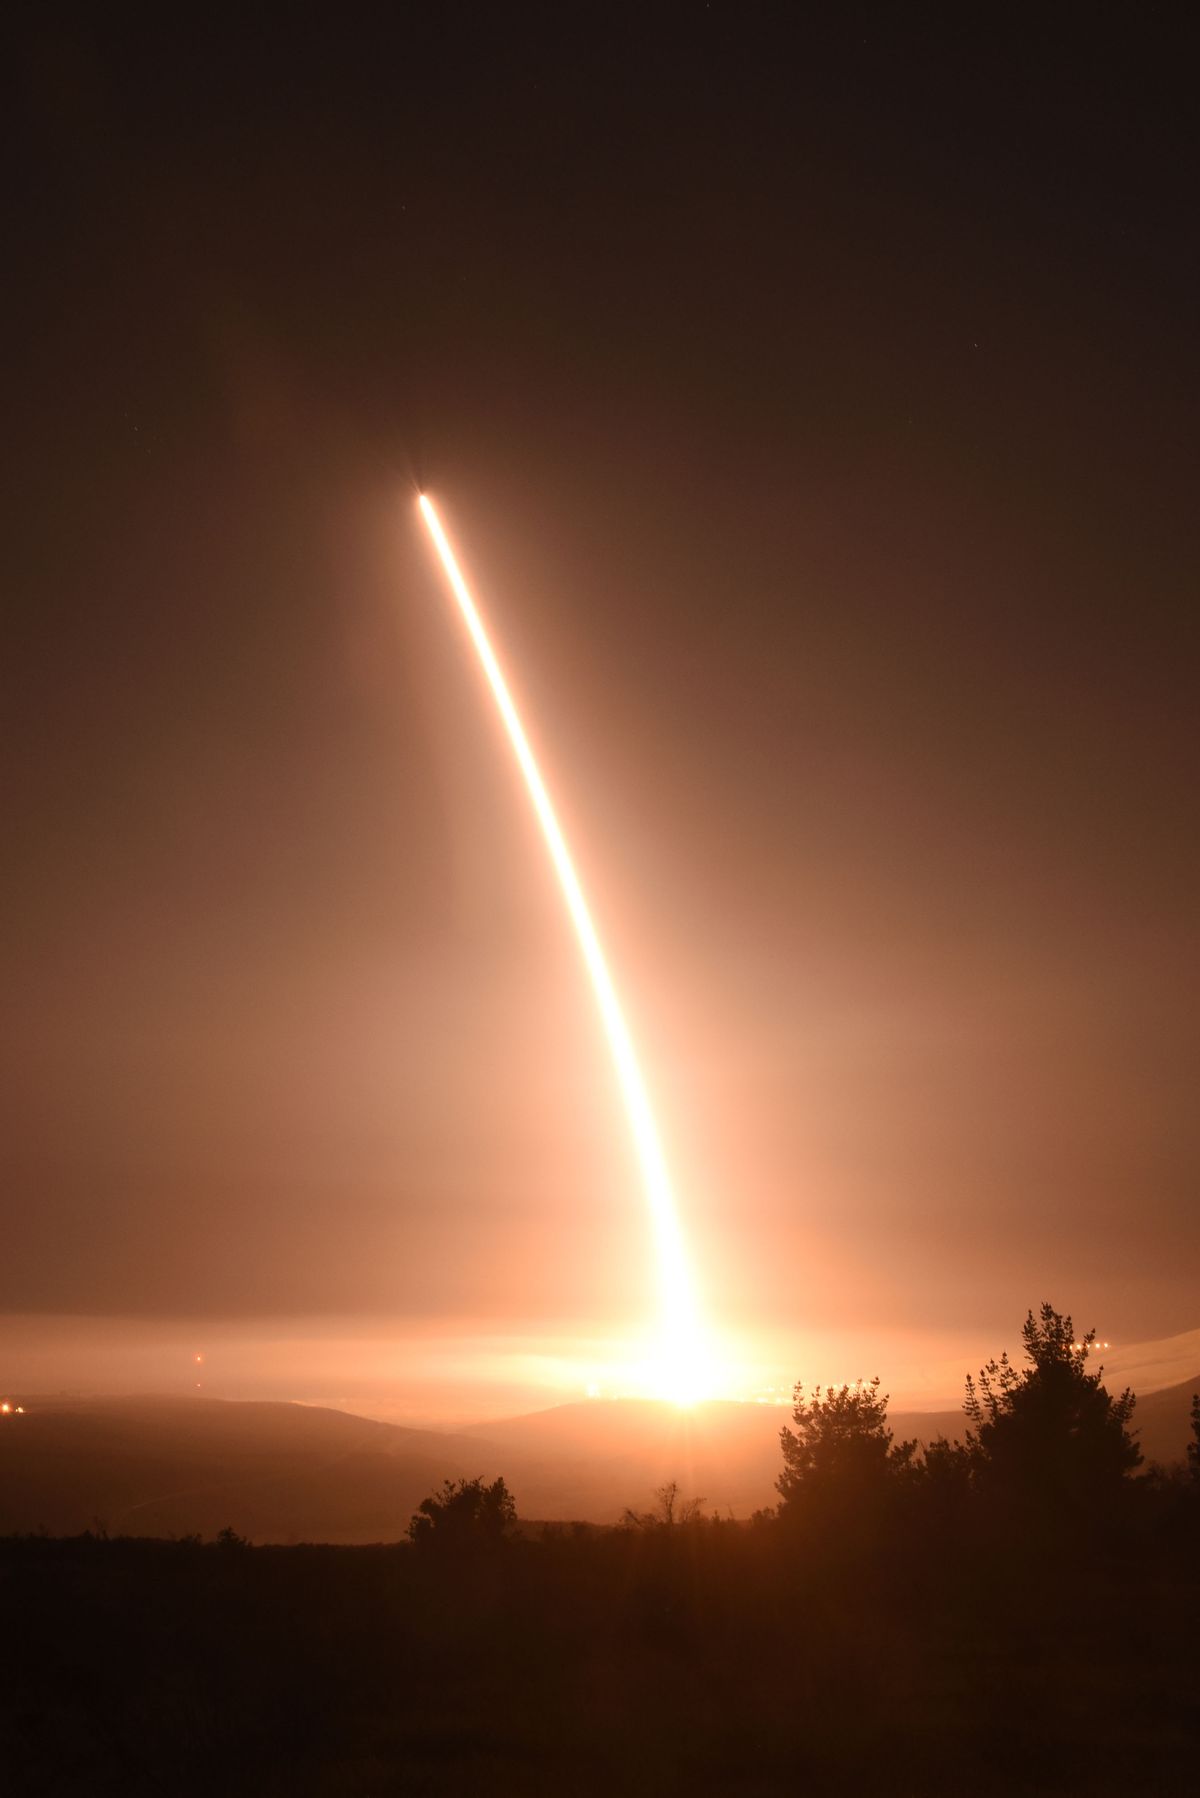 This Thursday, Feb. 25, 2016 photo provided by the U.S. Air Force shows an unarmed Minuteman 3 intercontinental ballistic missile launches during an operational test from Vandenberg Air Force Base, Calif. The unarmed missile roared out of its underground bunker on the California coastline and soared over the Pacific, inscribing the signature of American power amid growing worry about North Korea's pursuit of nuclear weapons capable of reaching U.S. soil.(Staff Sgt. Jim Araos/U.S. Air Force via AP) (AP)